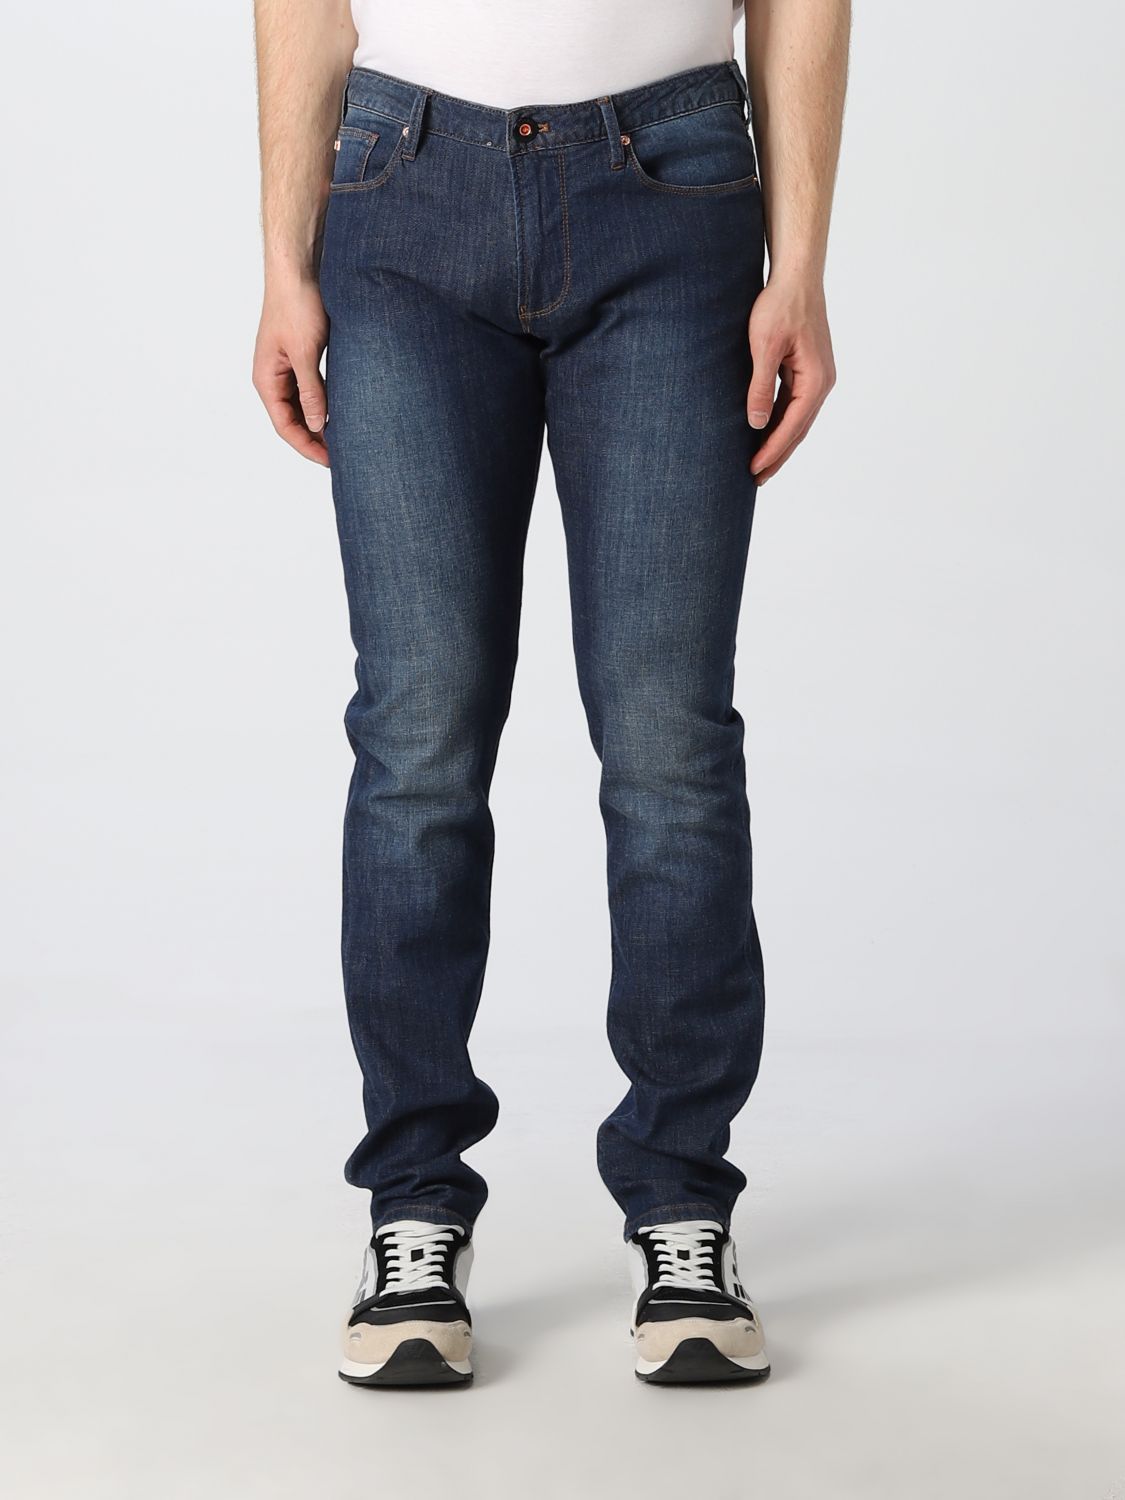 EMPORIO ARMANI JEANS IN WASHED DENIM,D11525028